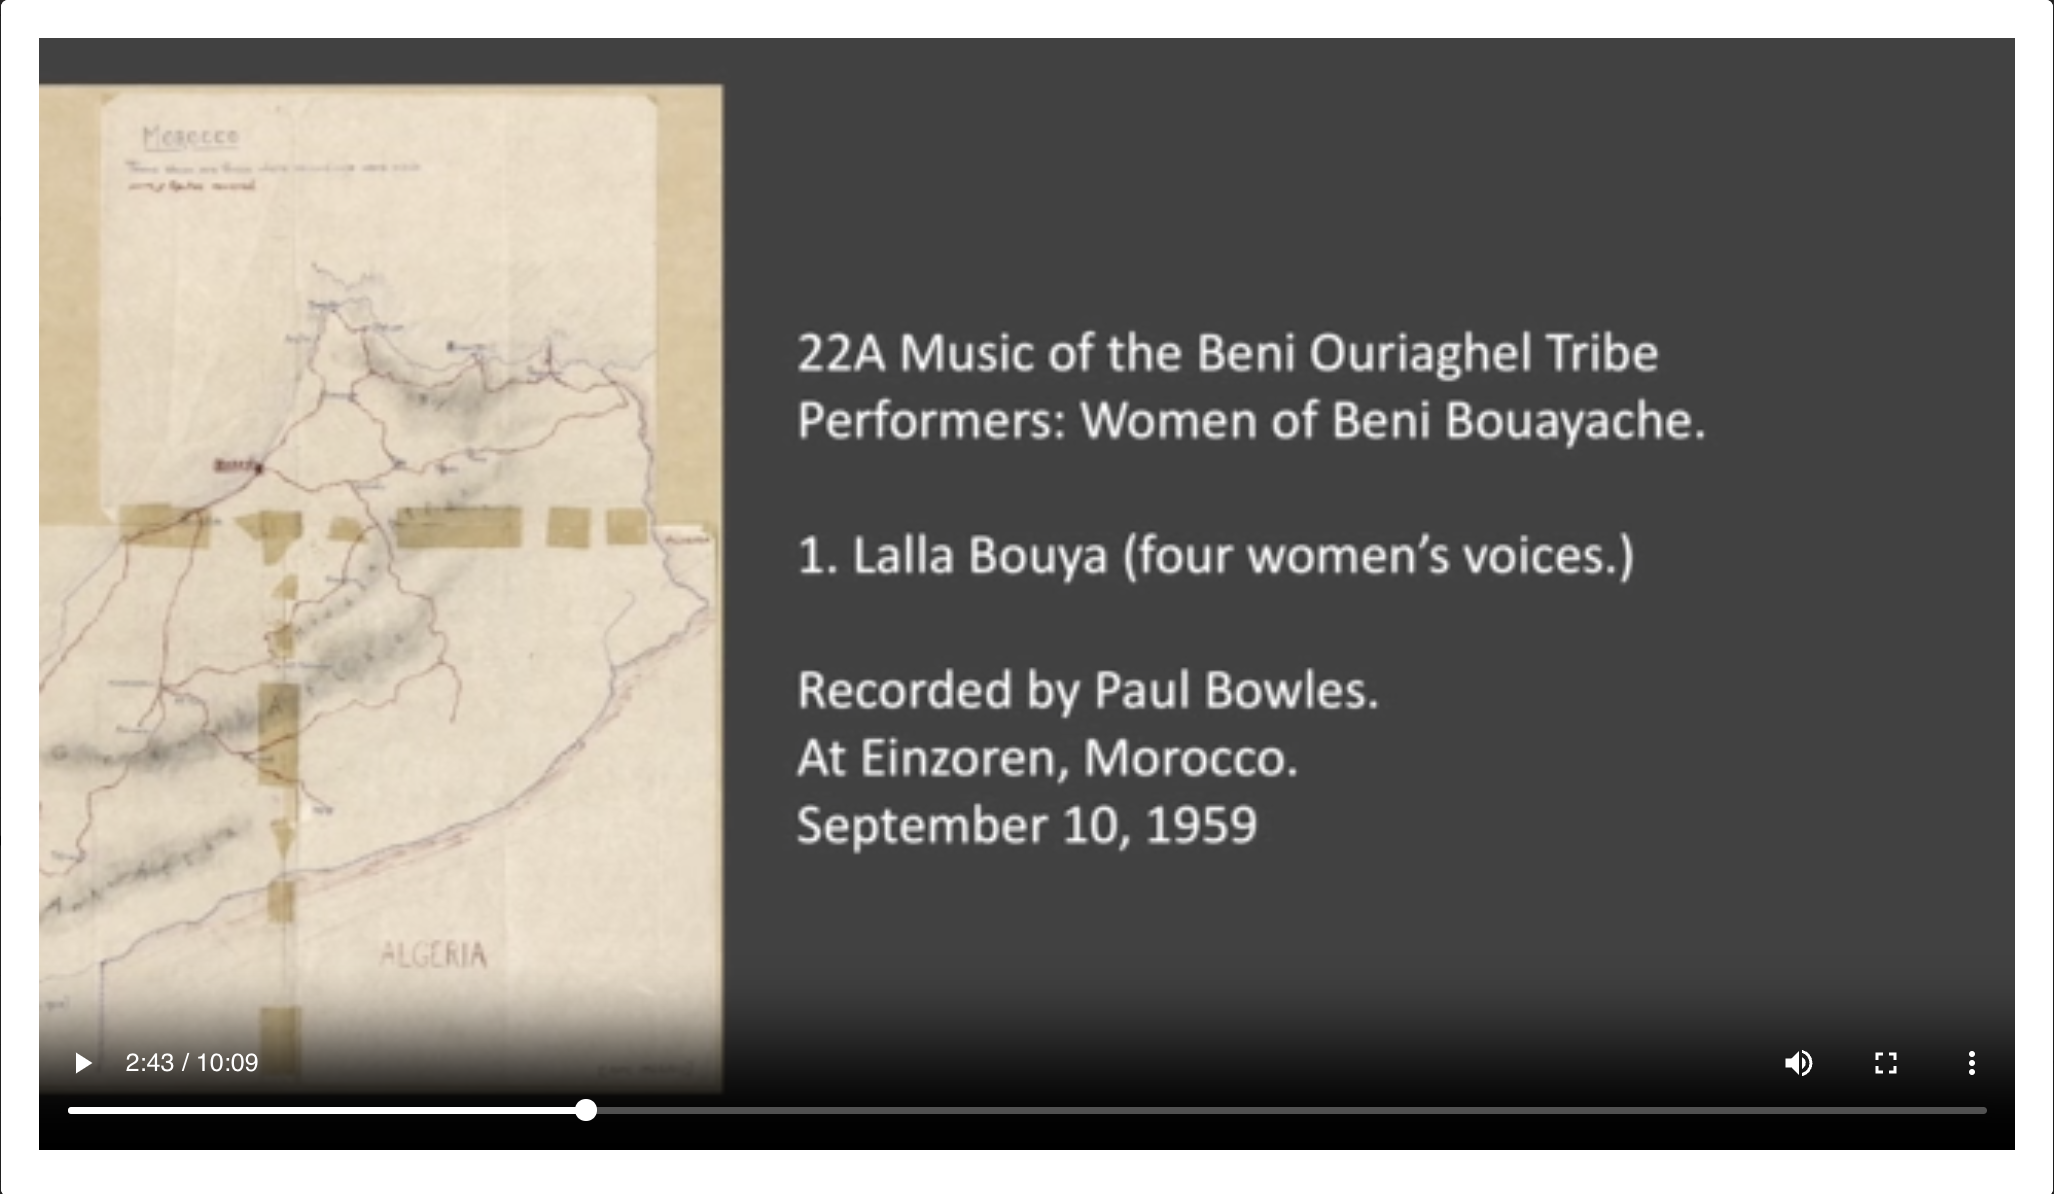 <p>22A 1. Lalla Bouya (four women’s voices.) Performers: Women of Beni Bouayache. Recorded by Paul Bowles at Einzoren, Morocco. September 10, 1959</p>